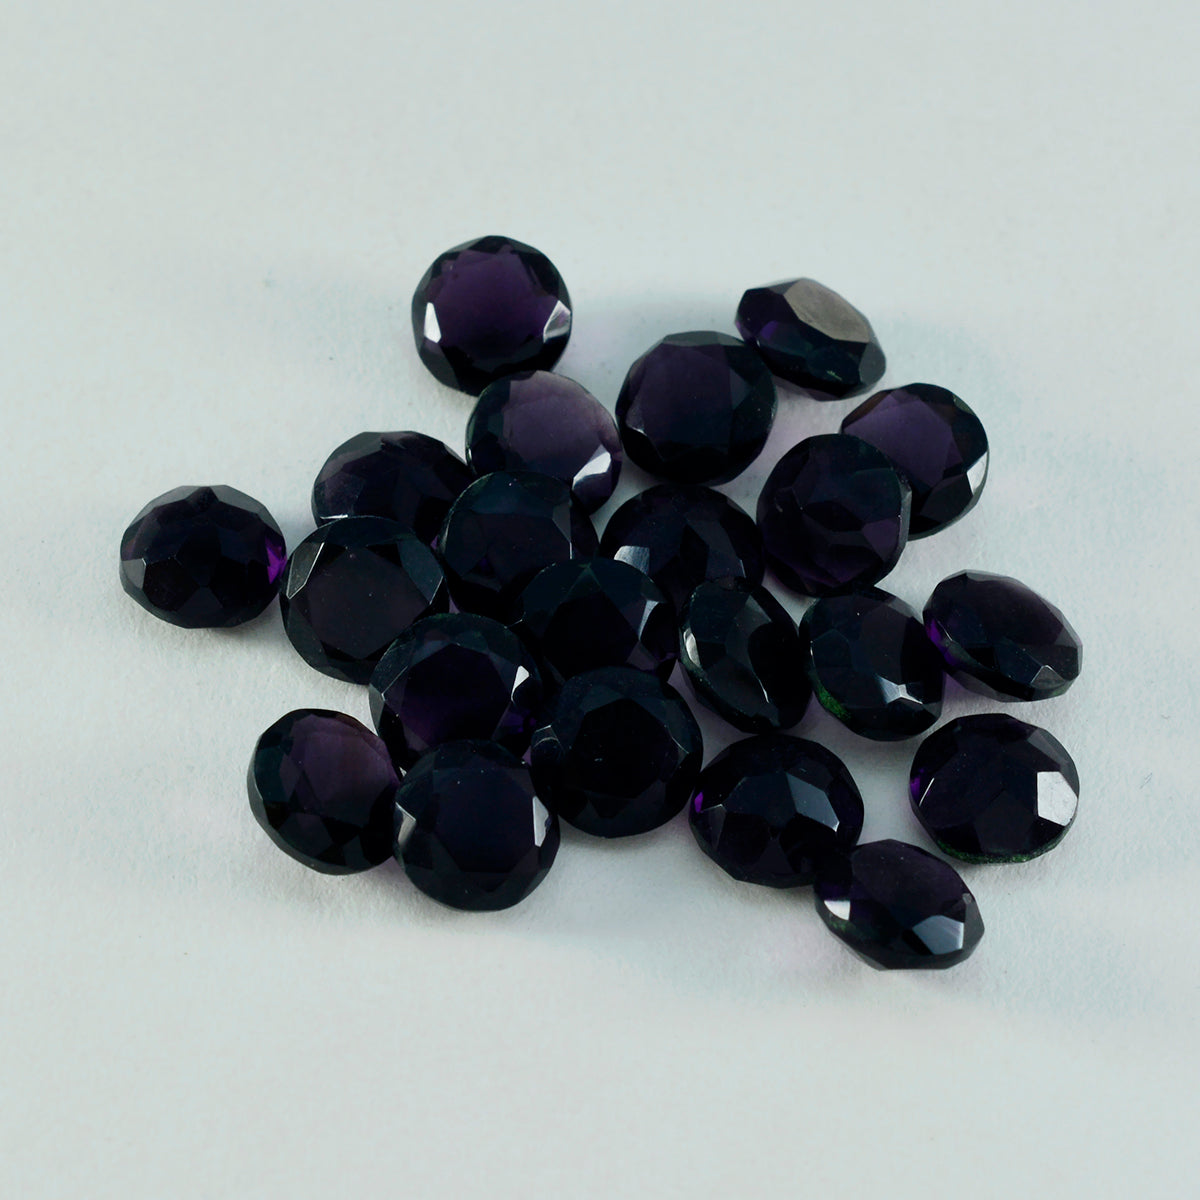 Riyogems 1PC Purple Amethyst CZ Faceted 8x8 mm Round Shape good-looking Quality Loose Stone